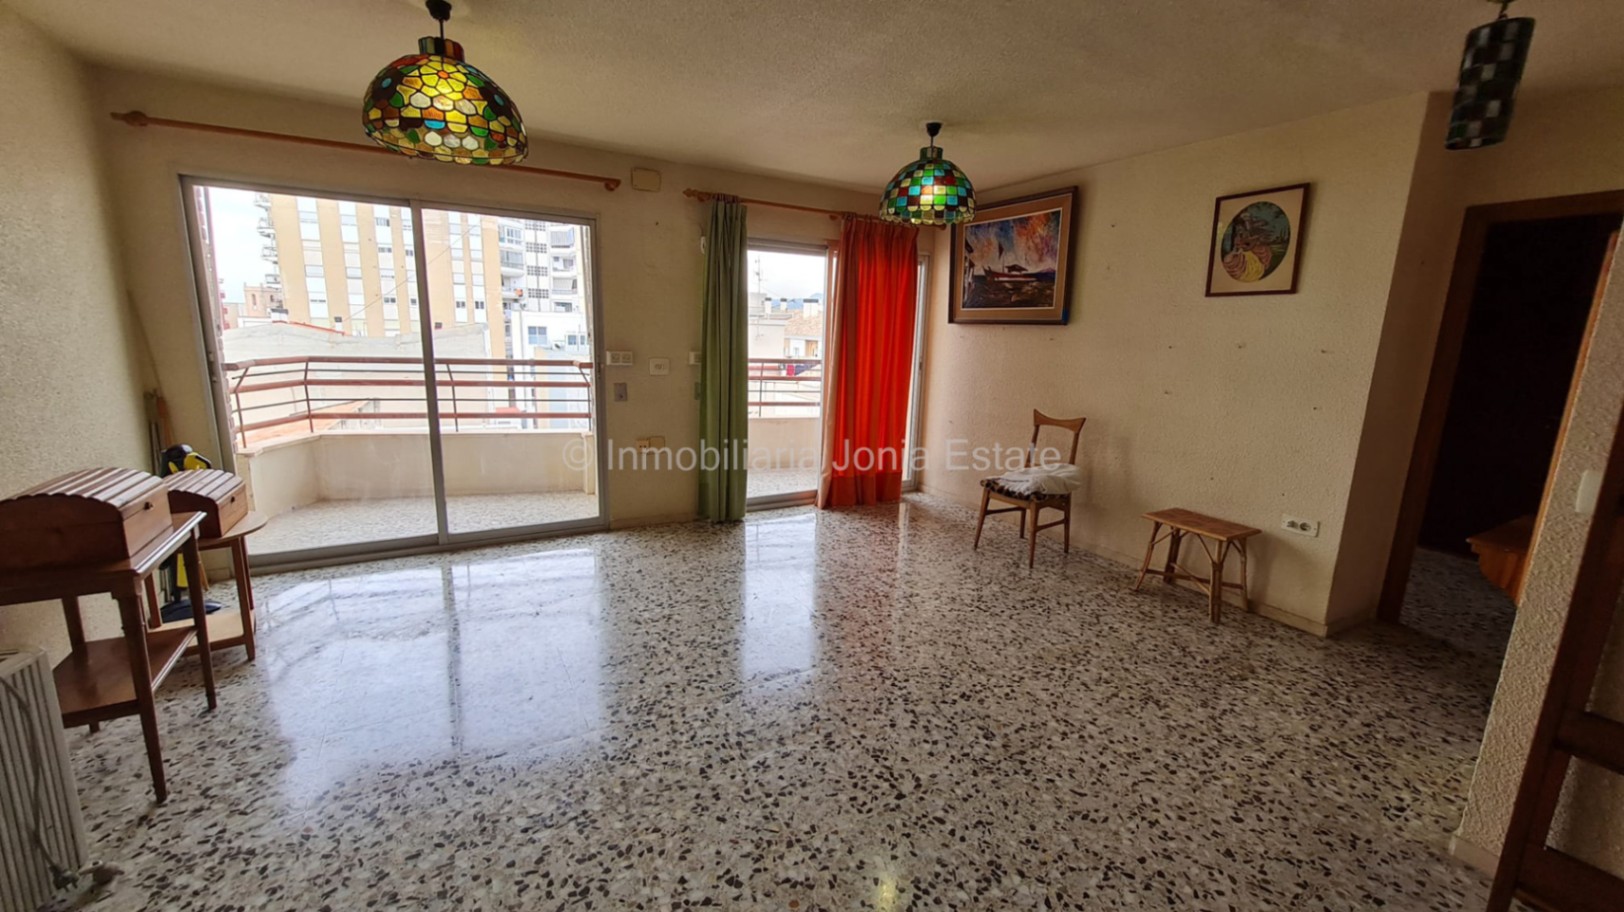 Centrally located apartment with sea views